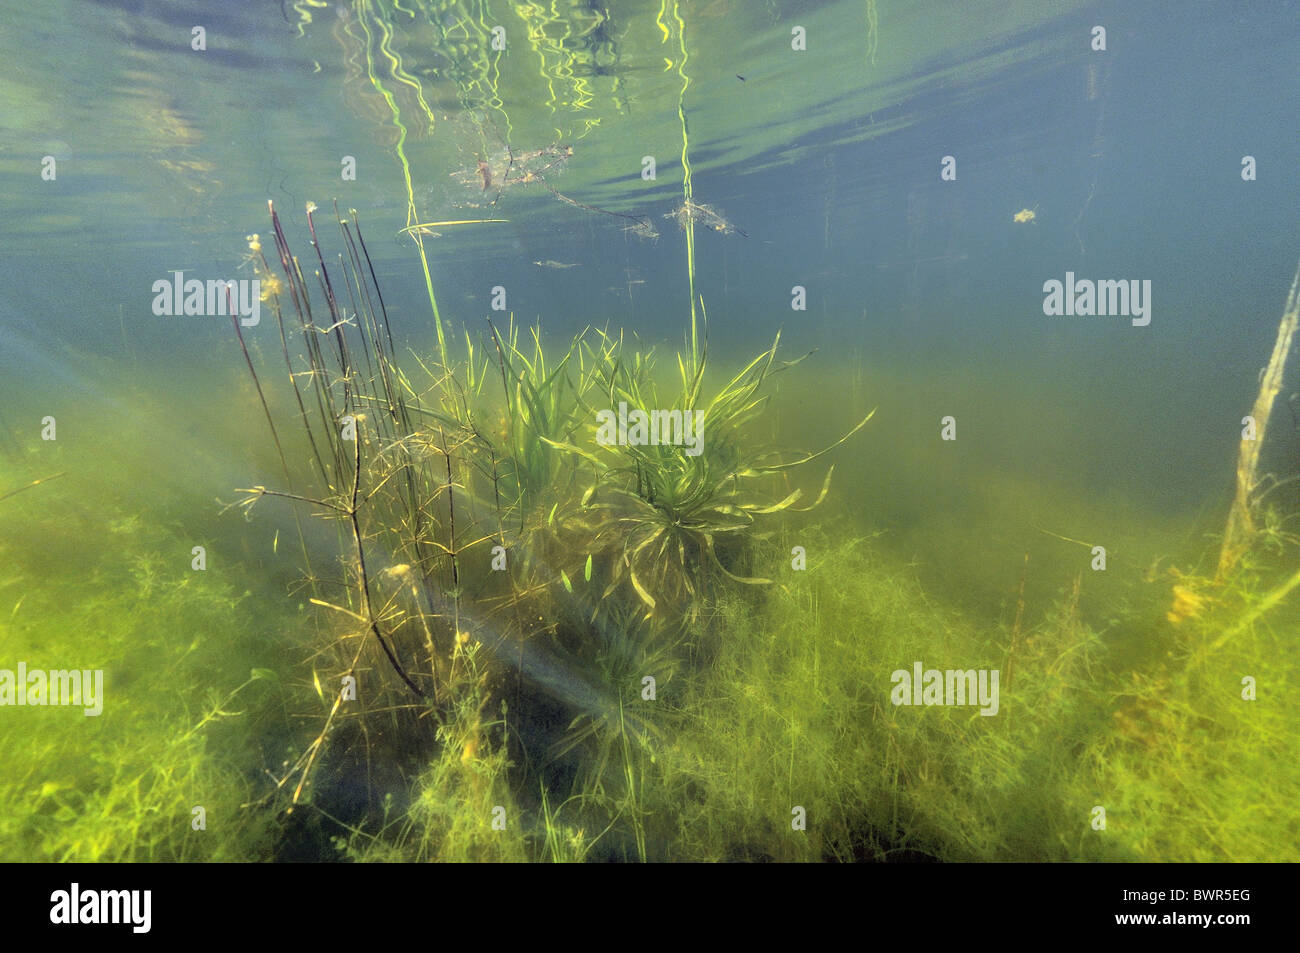 Water-soldier - Water pineapple (Stratiotes aloides - Stratiotes aquaticus) in pond - underwater view - Summer Stock Photo